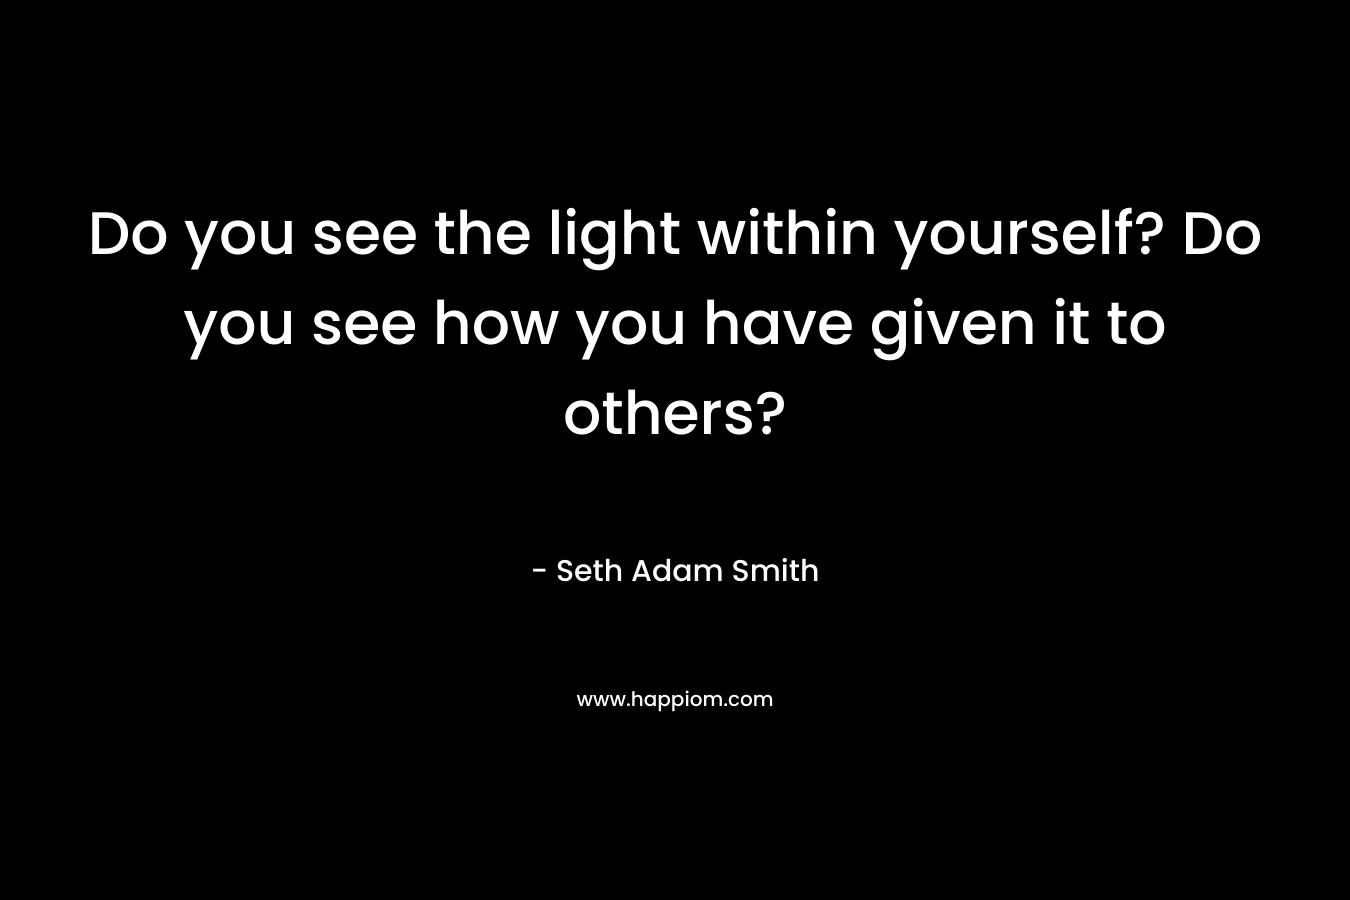 Do you see the light within yourself? Do you see how you have given it to others?